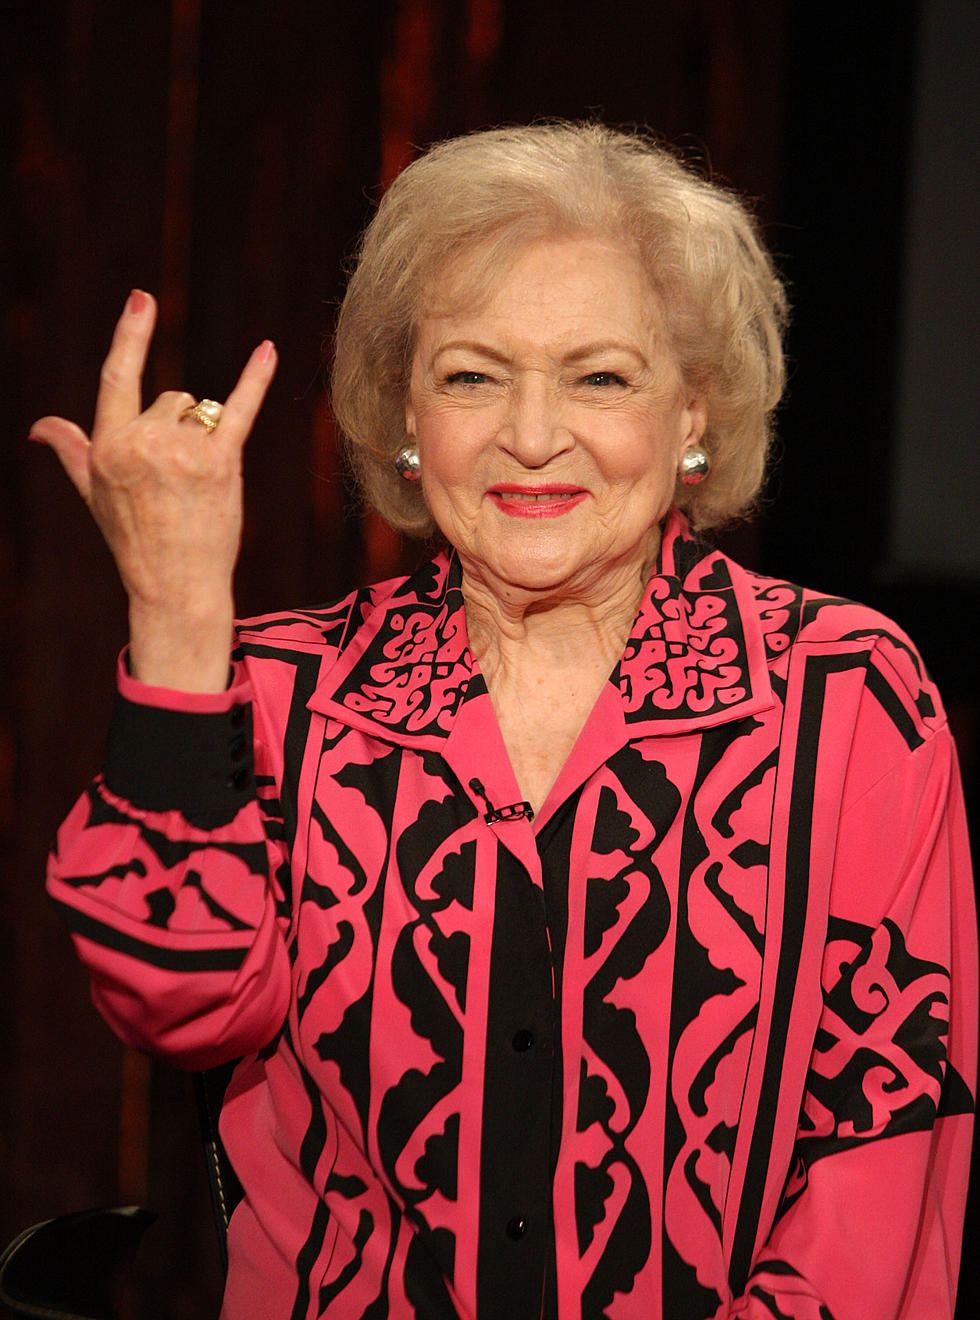 Celebrate Betty White’s Birthday In Philly At Cocktail Party